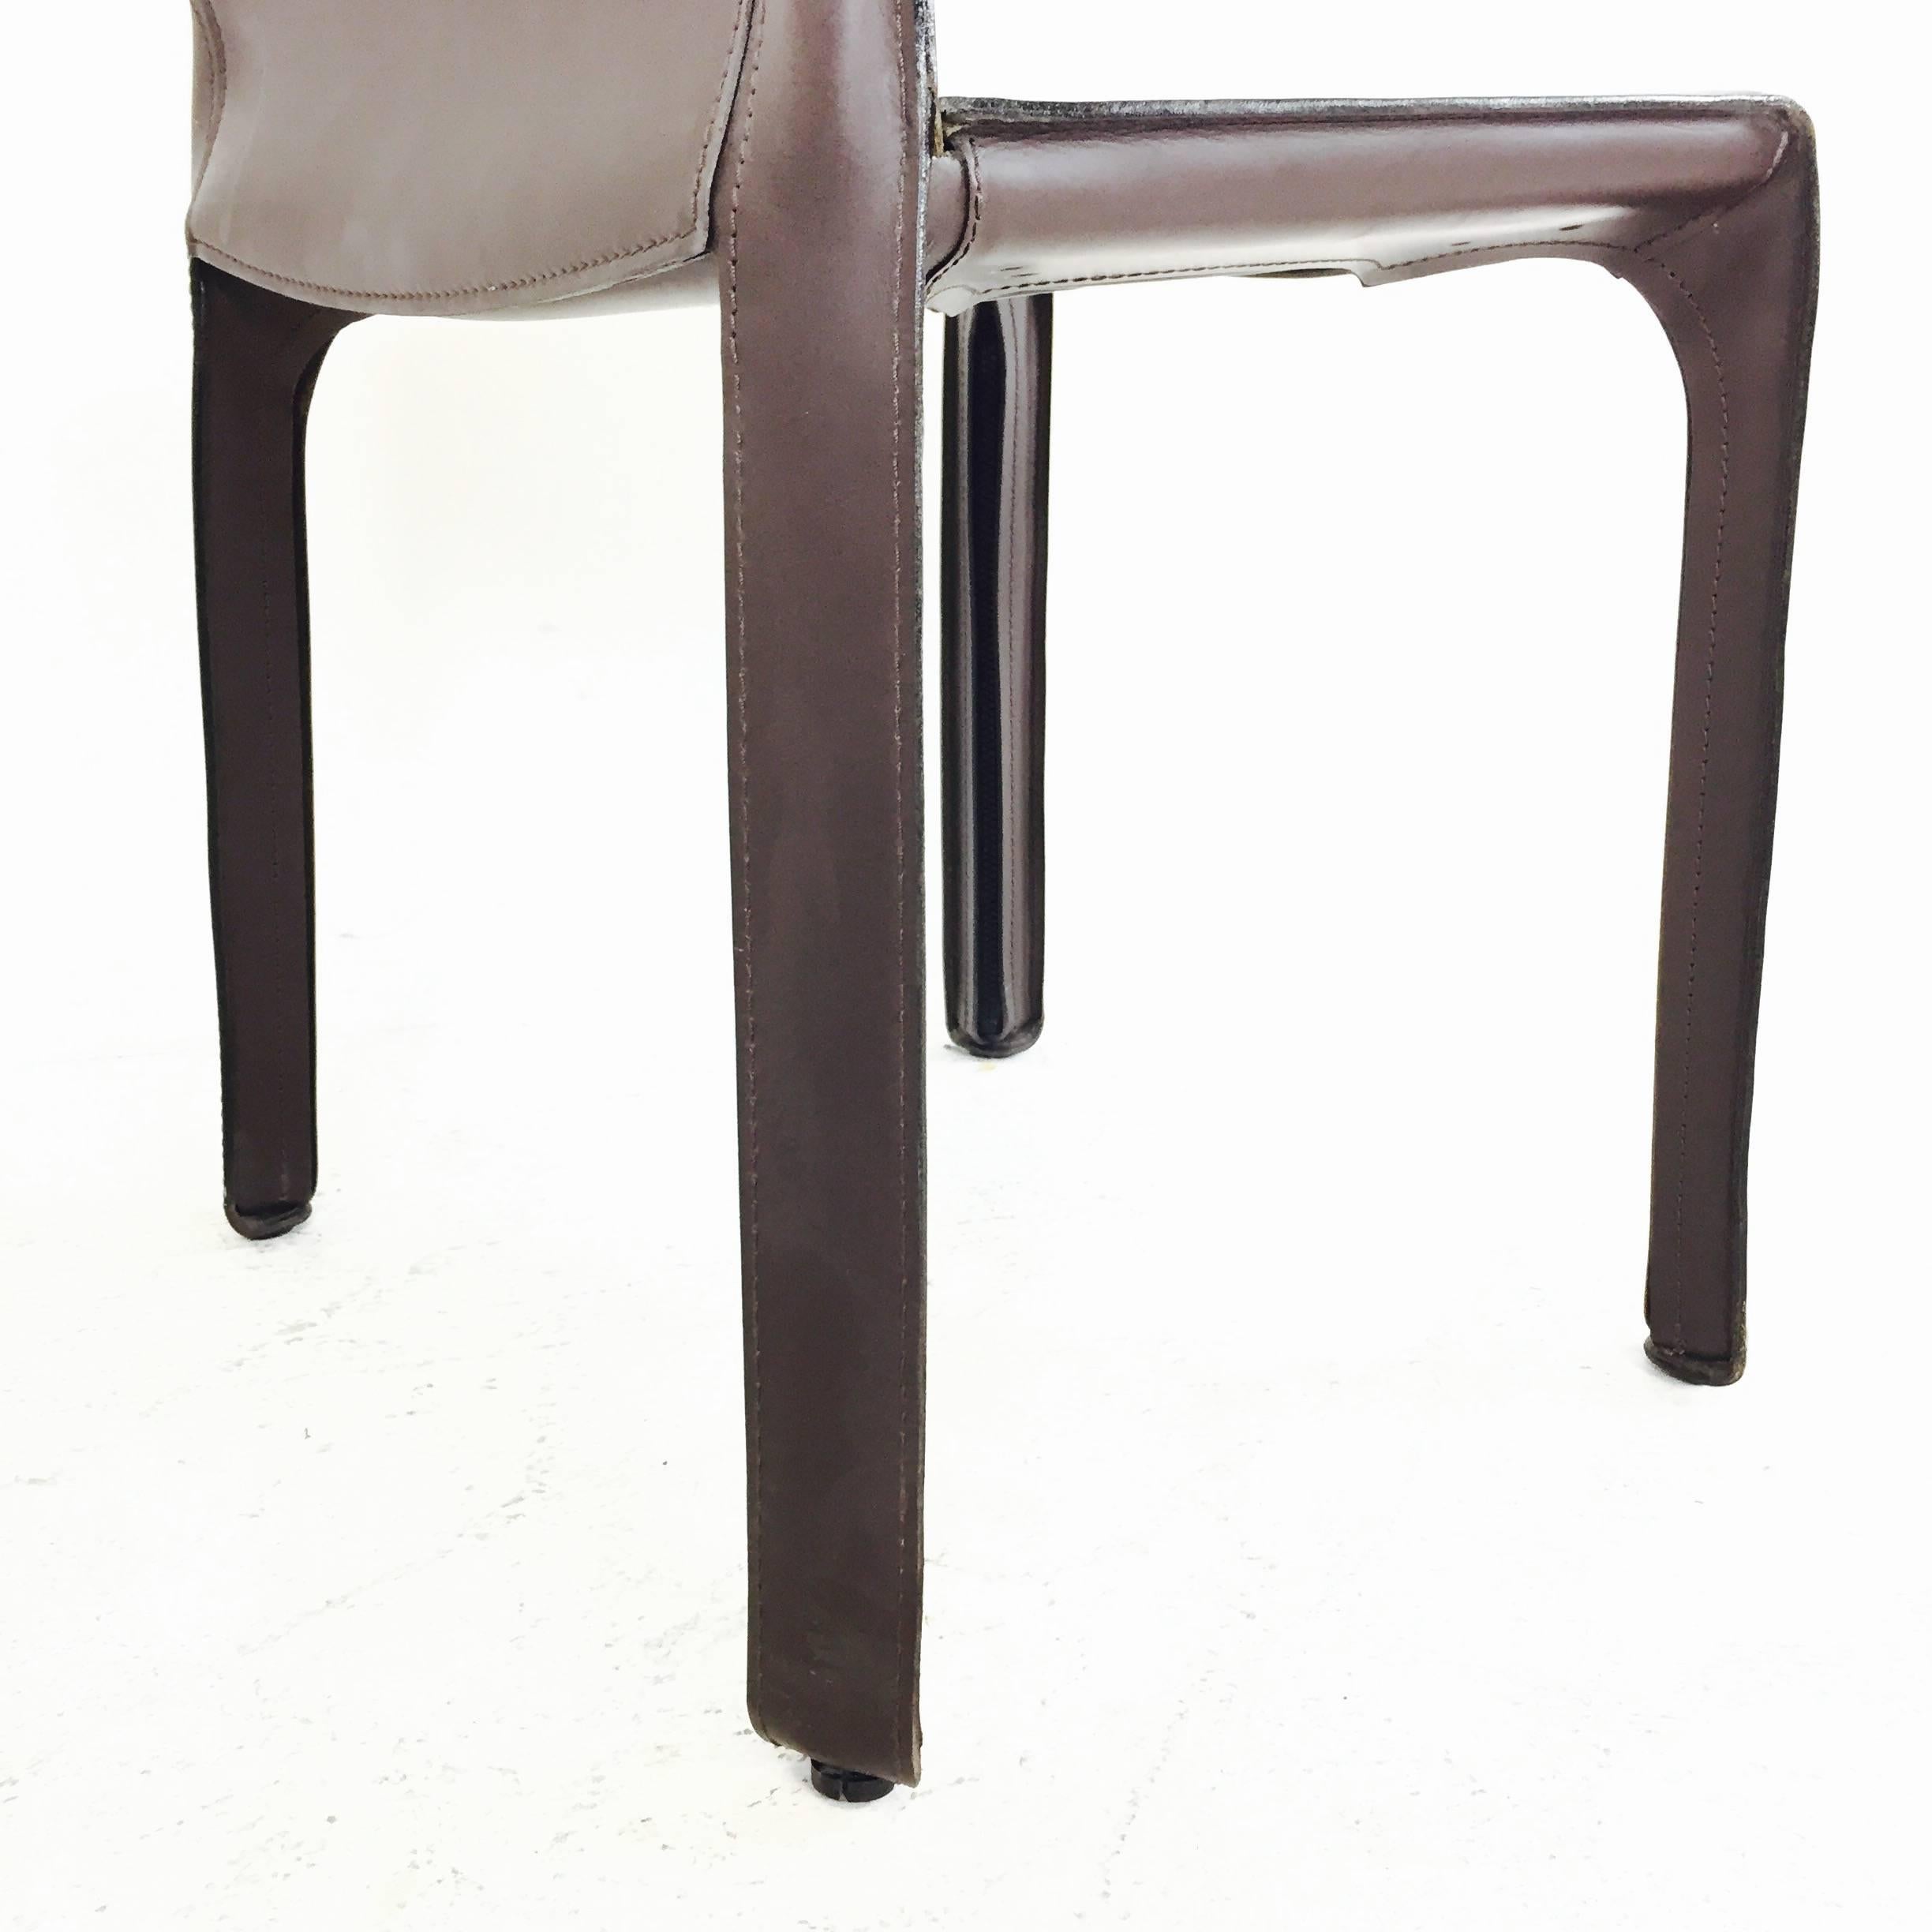 Italian Espresso Brown Mario Bellini Cab Leather Dining Chairs (3 Available)